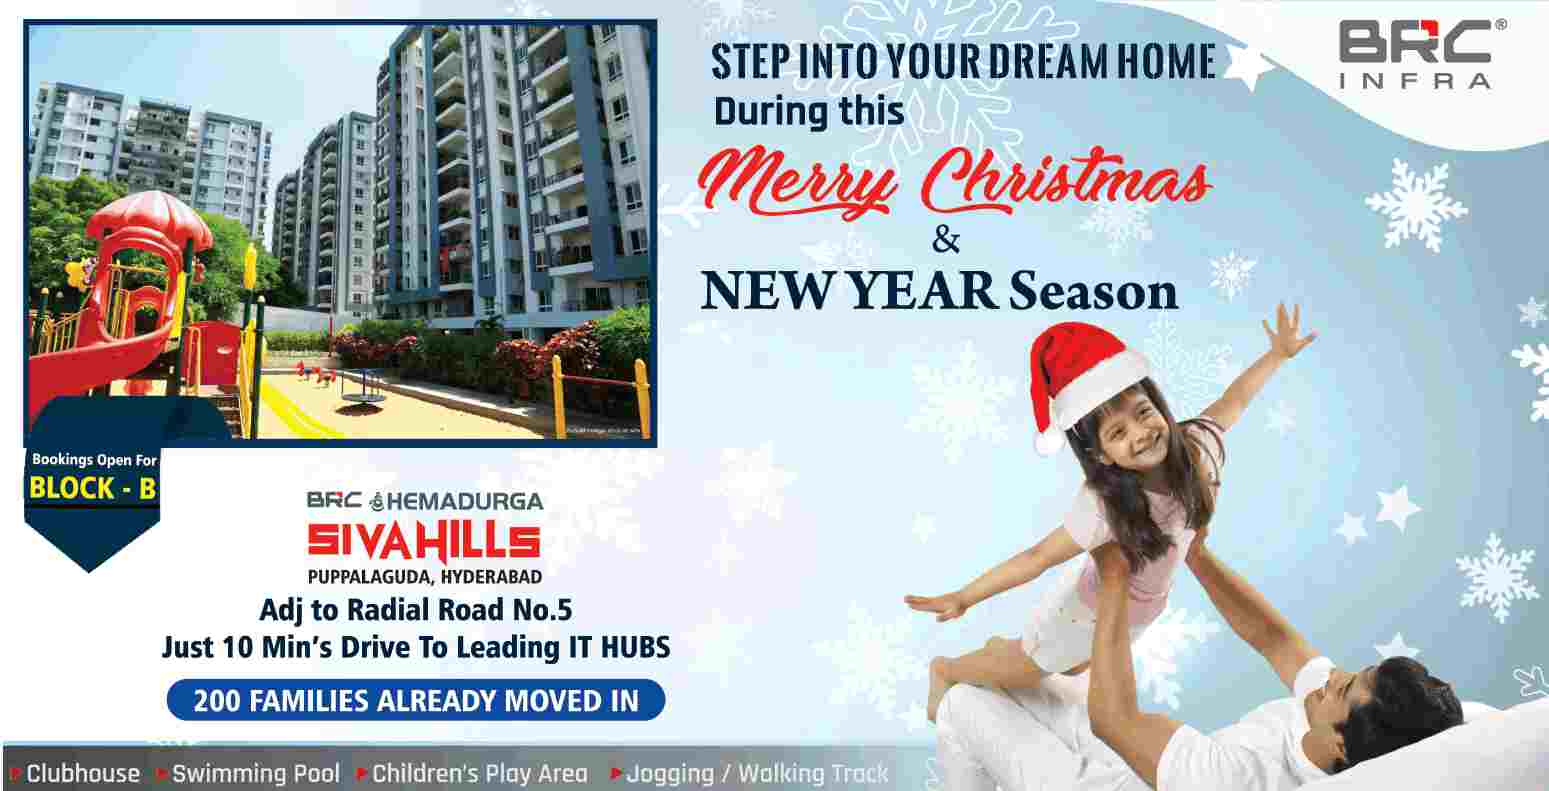 Step into your dream home at BRC Hemadurga Sivahills in Hyderabad Update